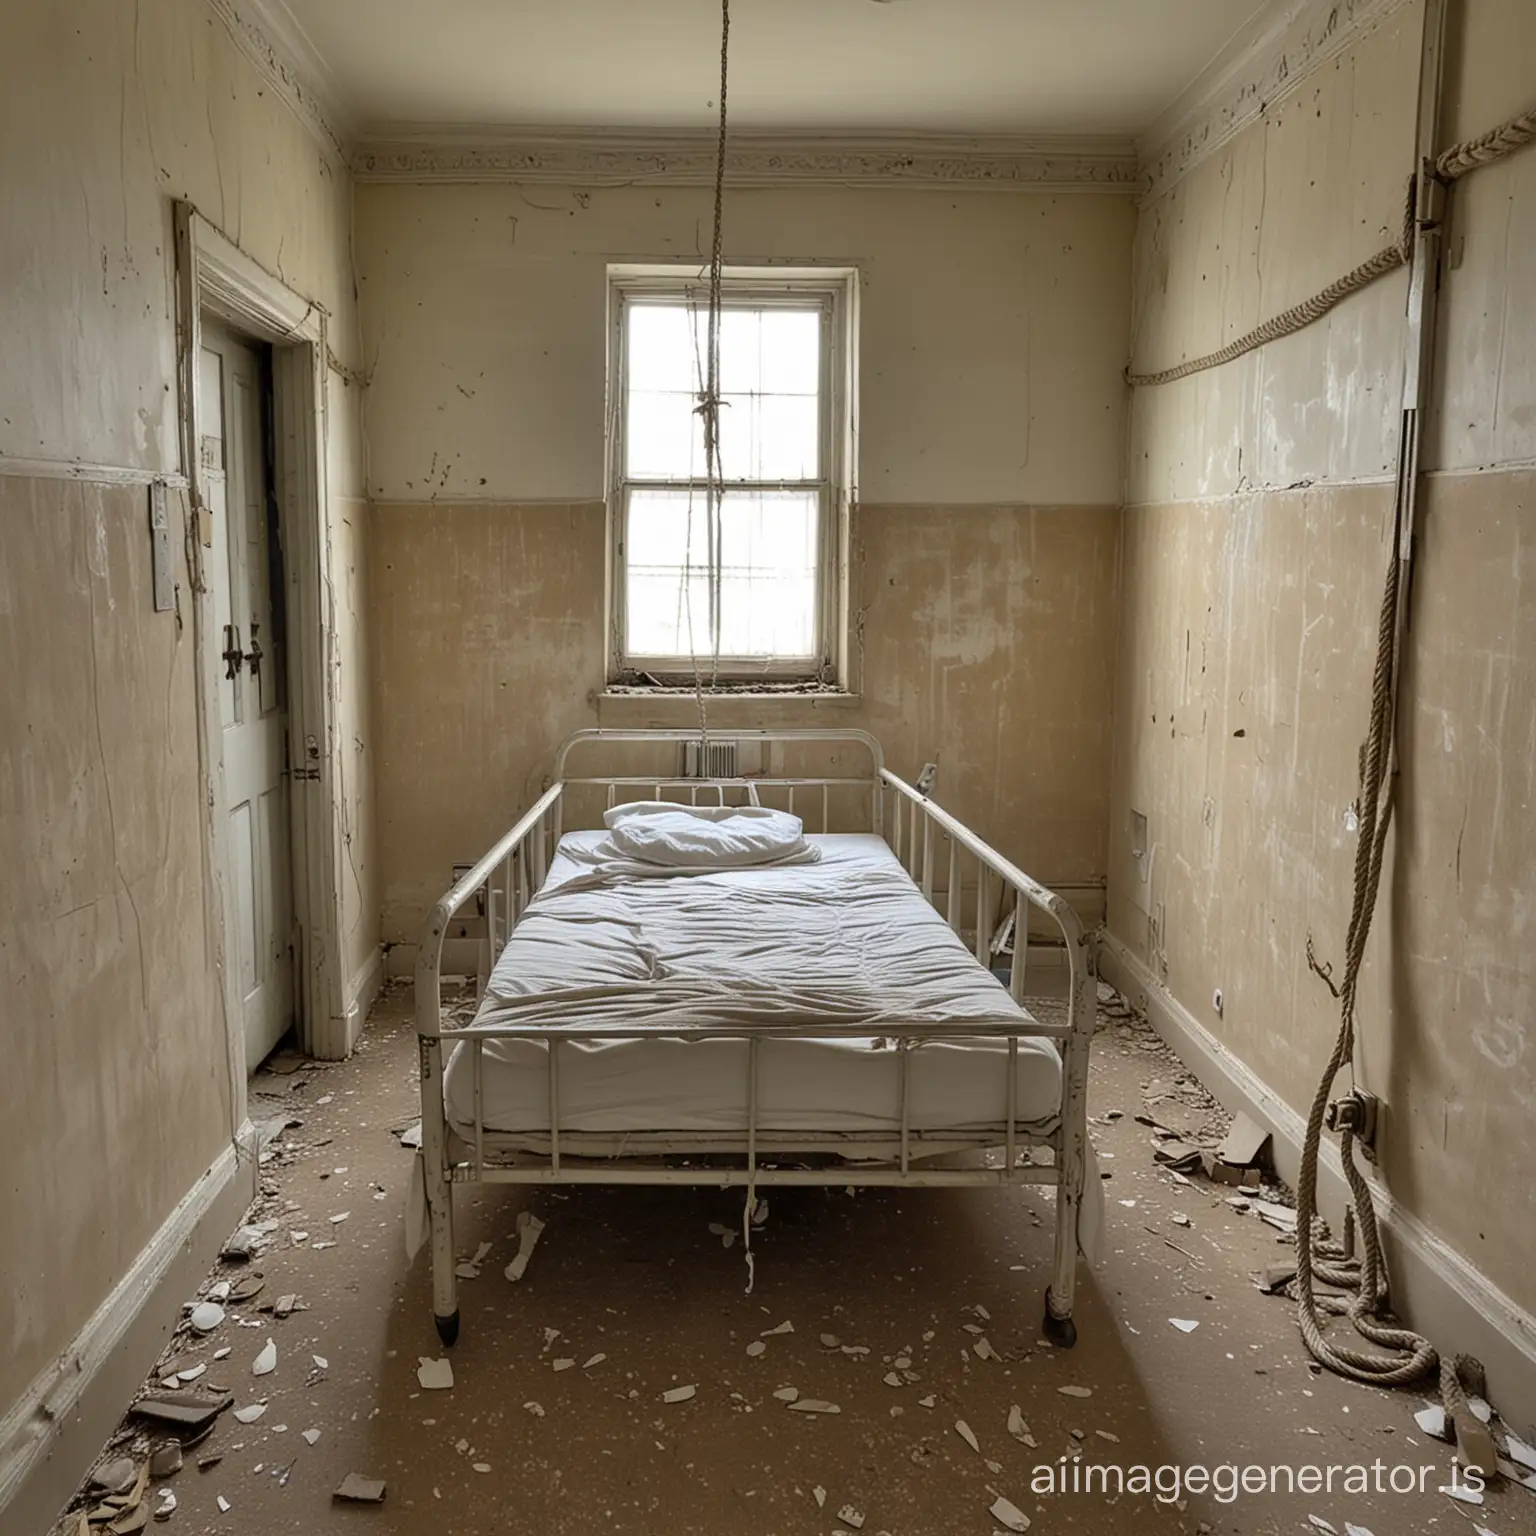 Psychiatric hospital open doors view of a bed with ropes scuffed walls